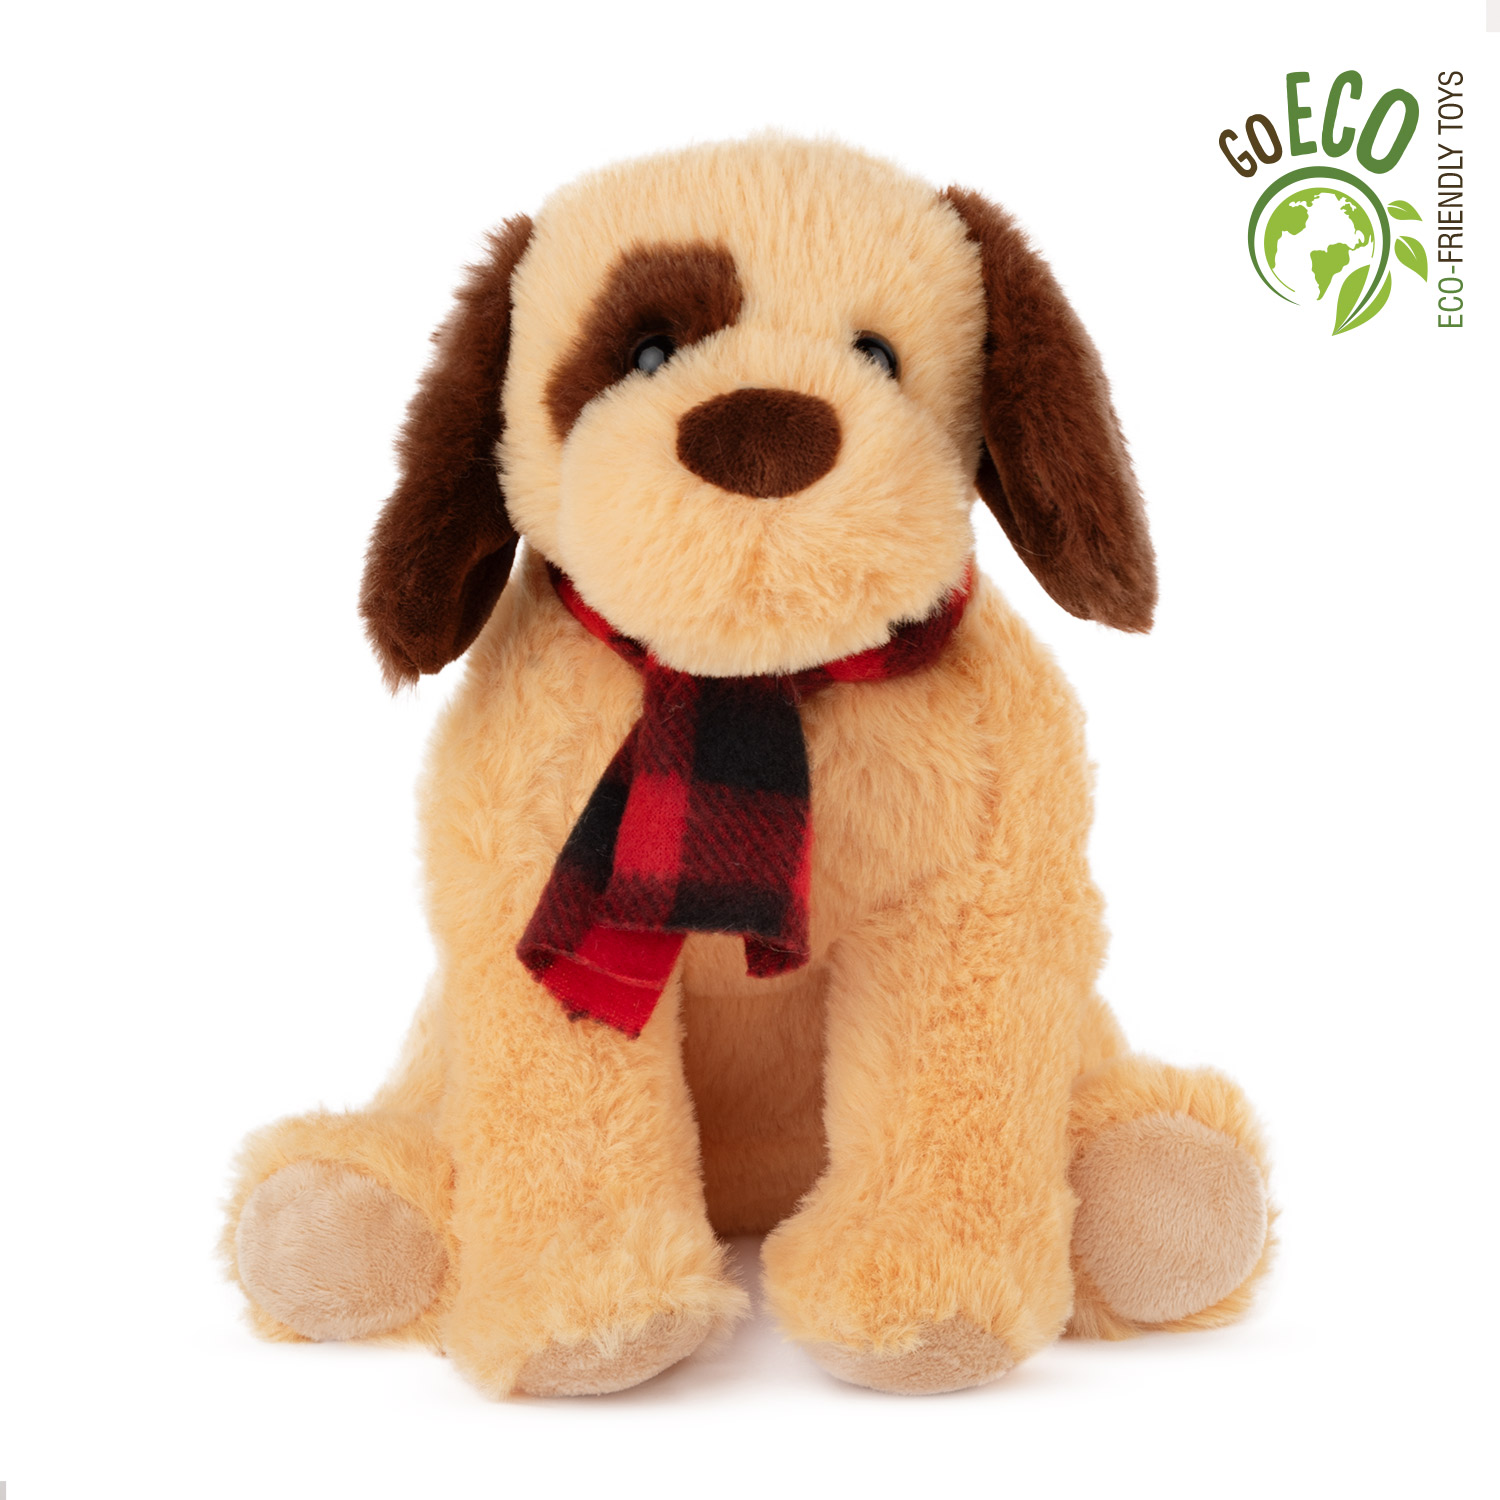 ECO Dog with scarf - Brown